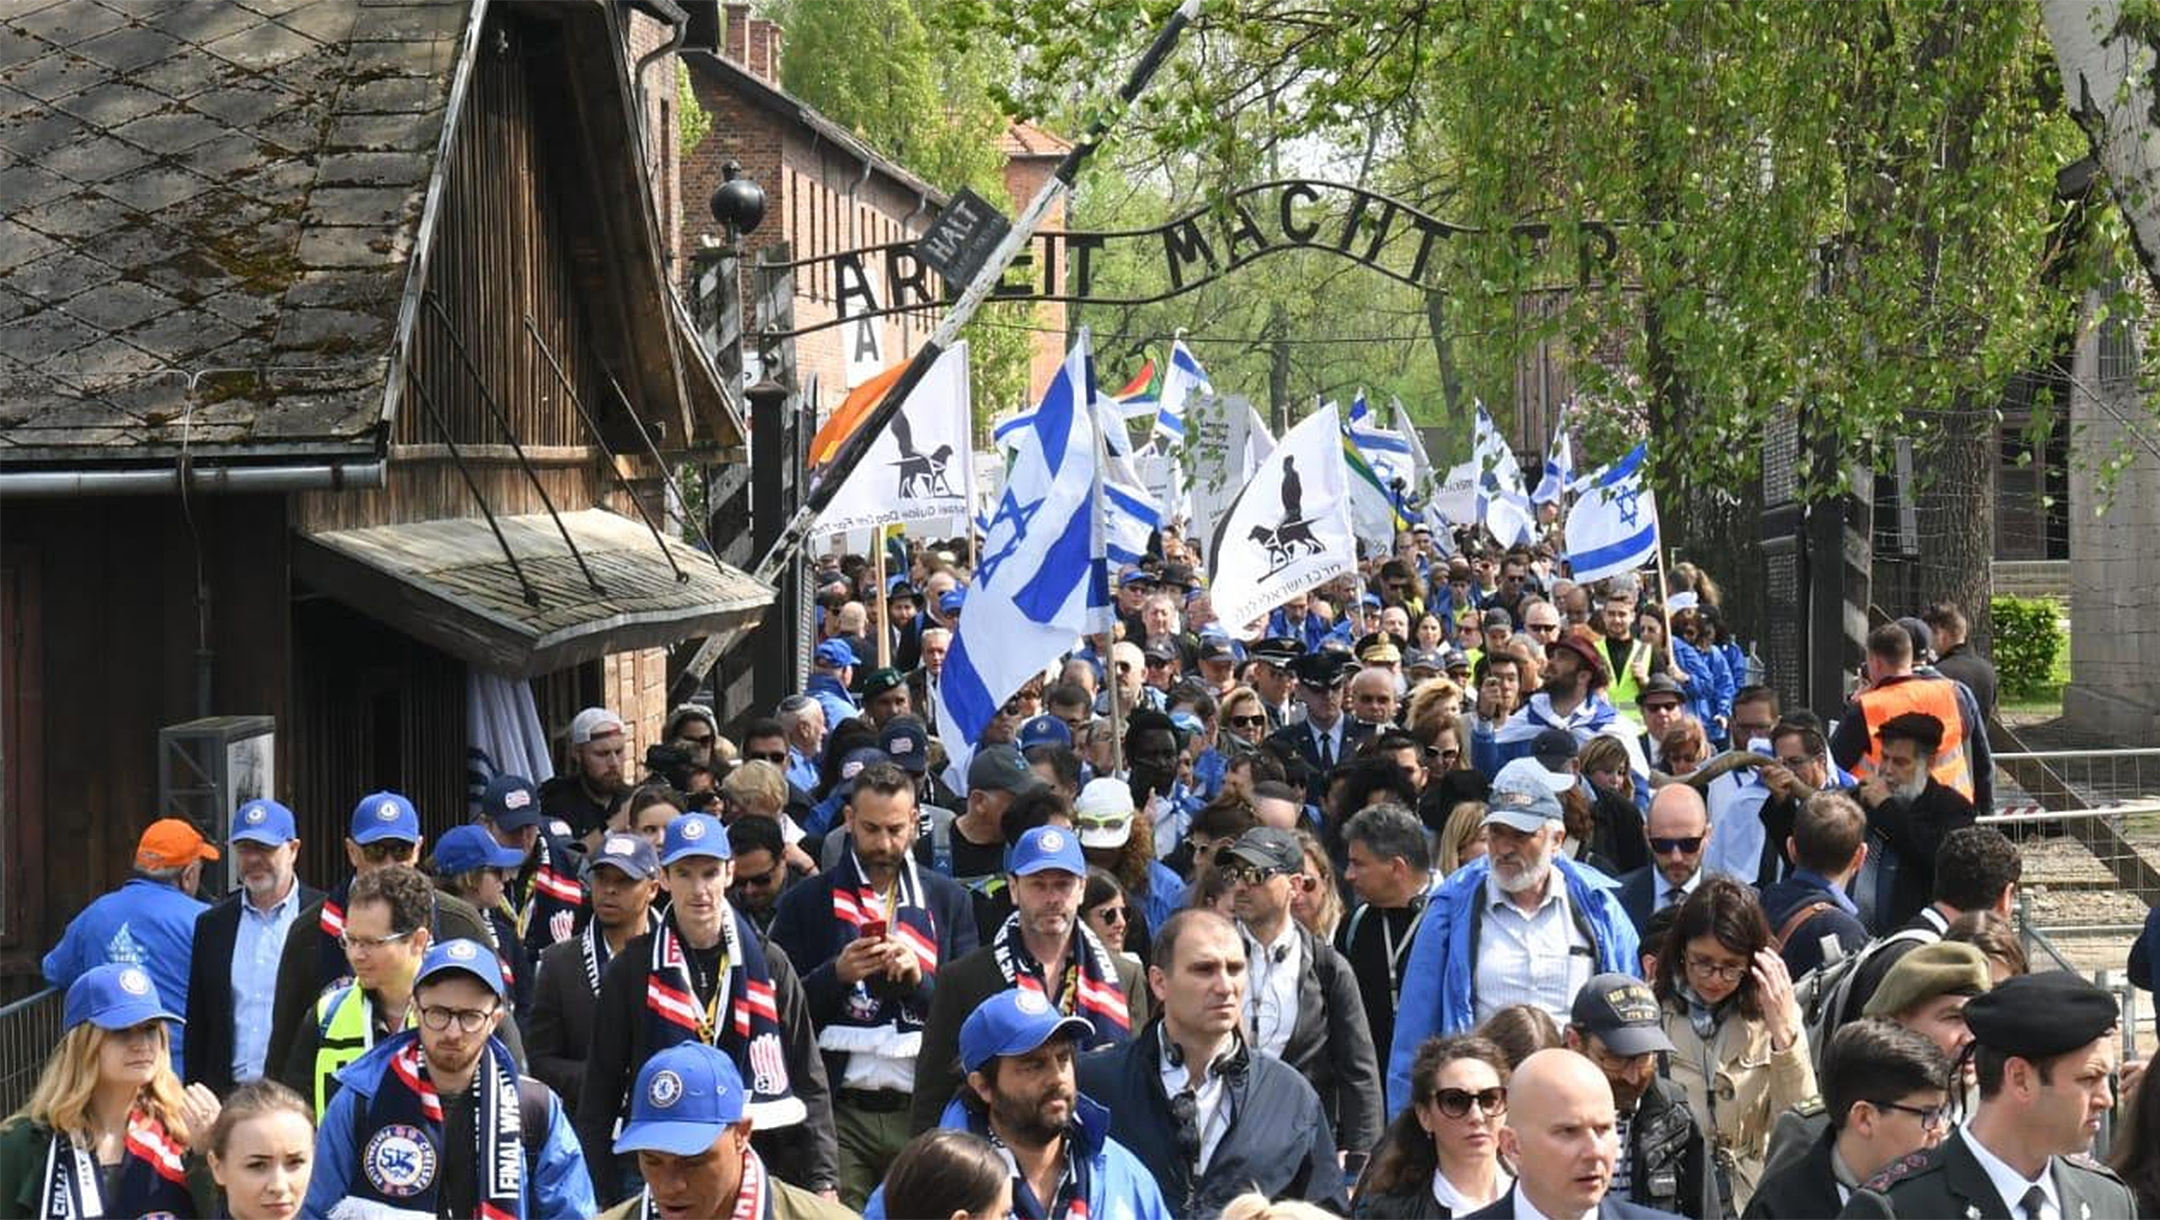 Participants of the March of the Living exit a gate in the former Nazi camp Auschwitz in Poland, May 2, 2019. (Courtesy of the International March of the Living)